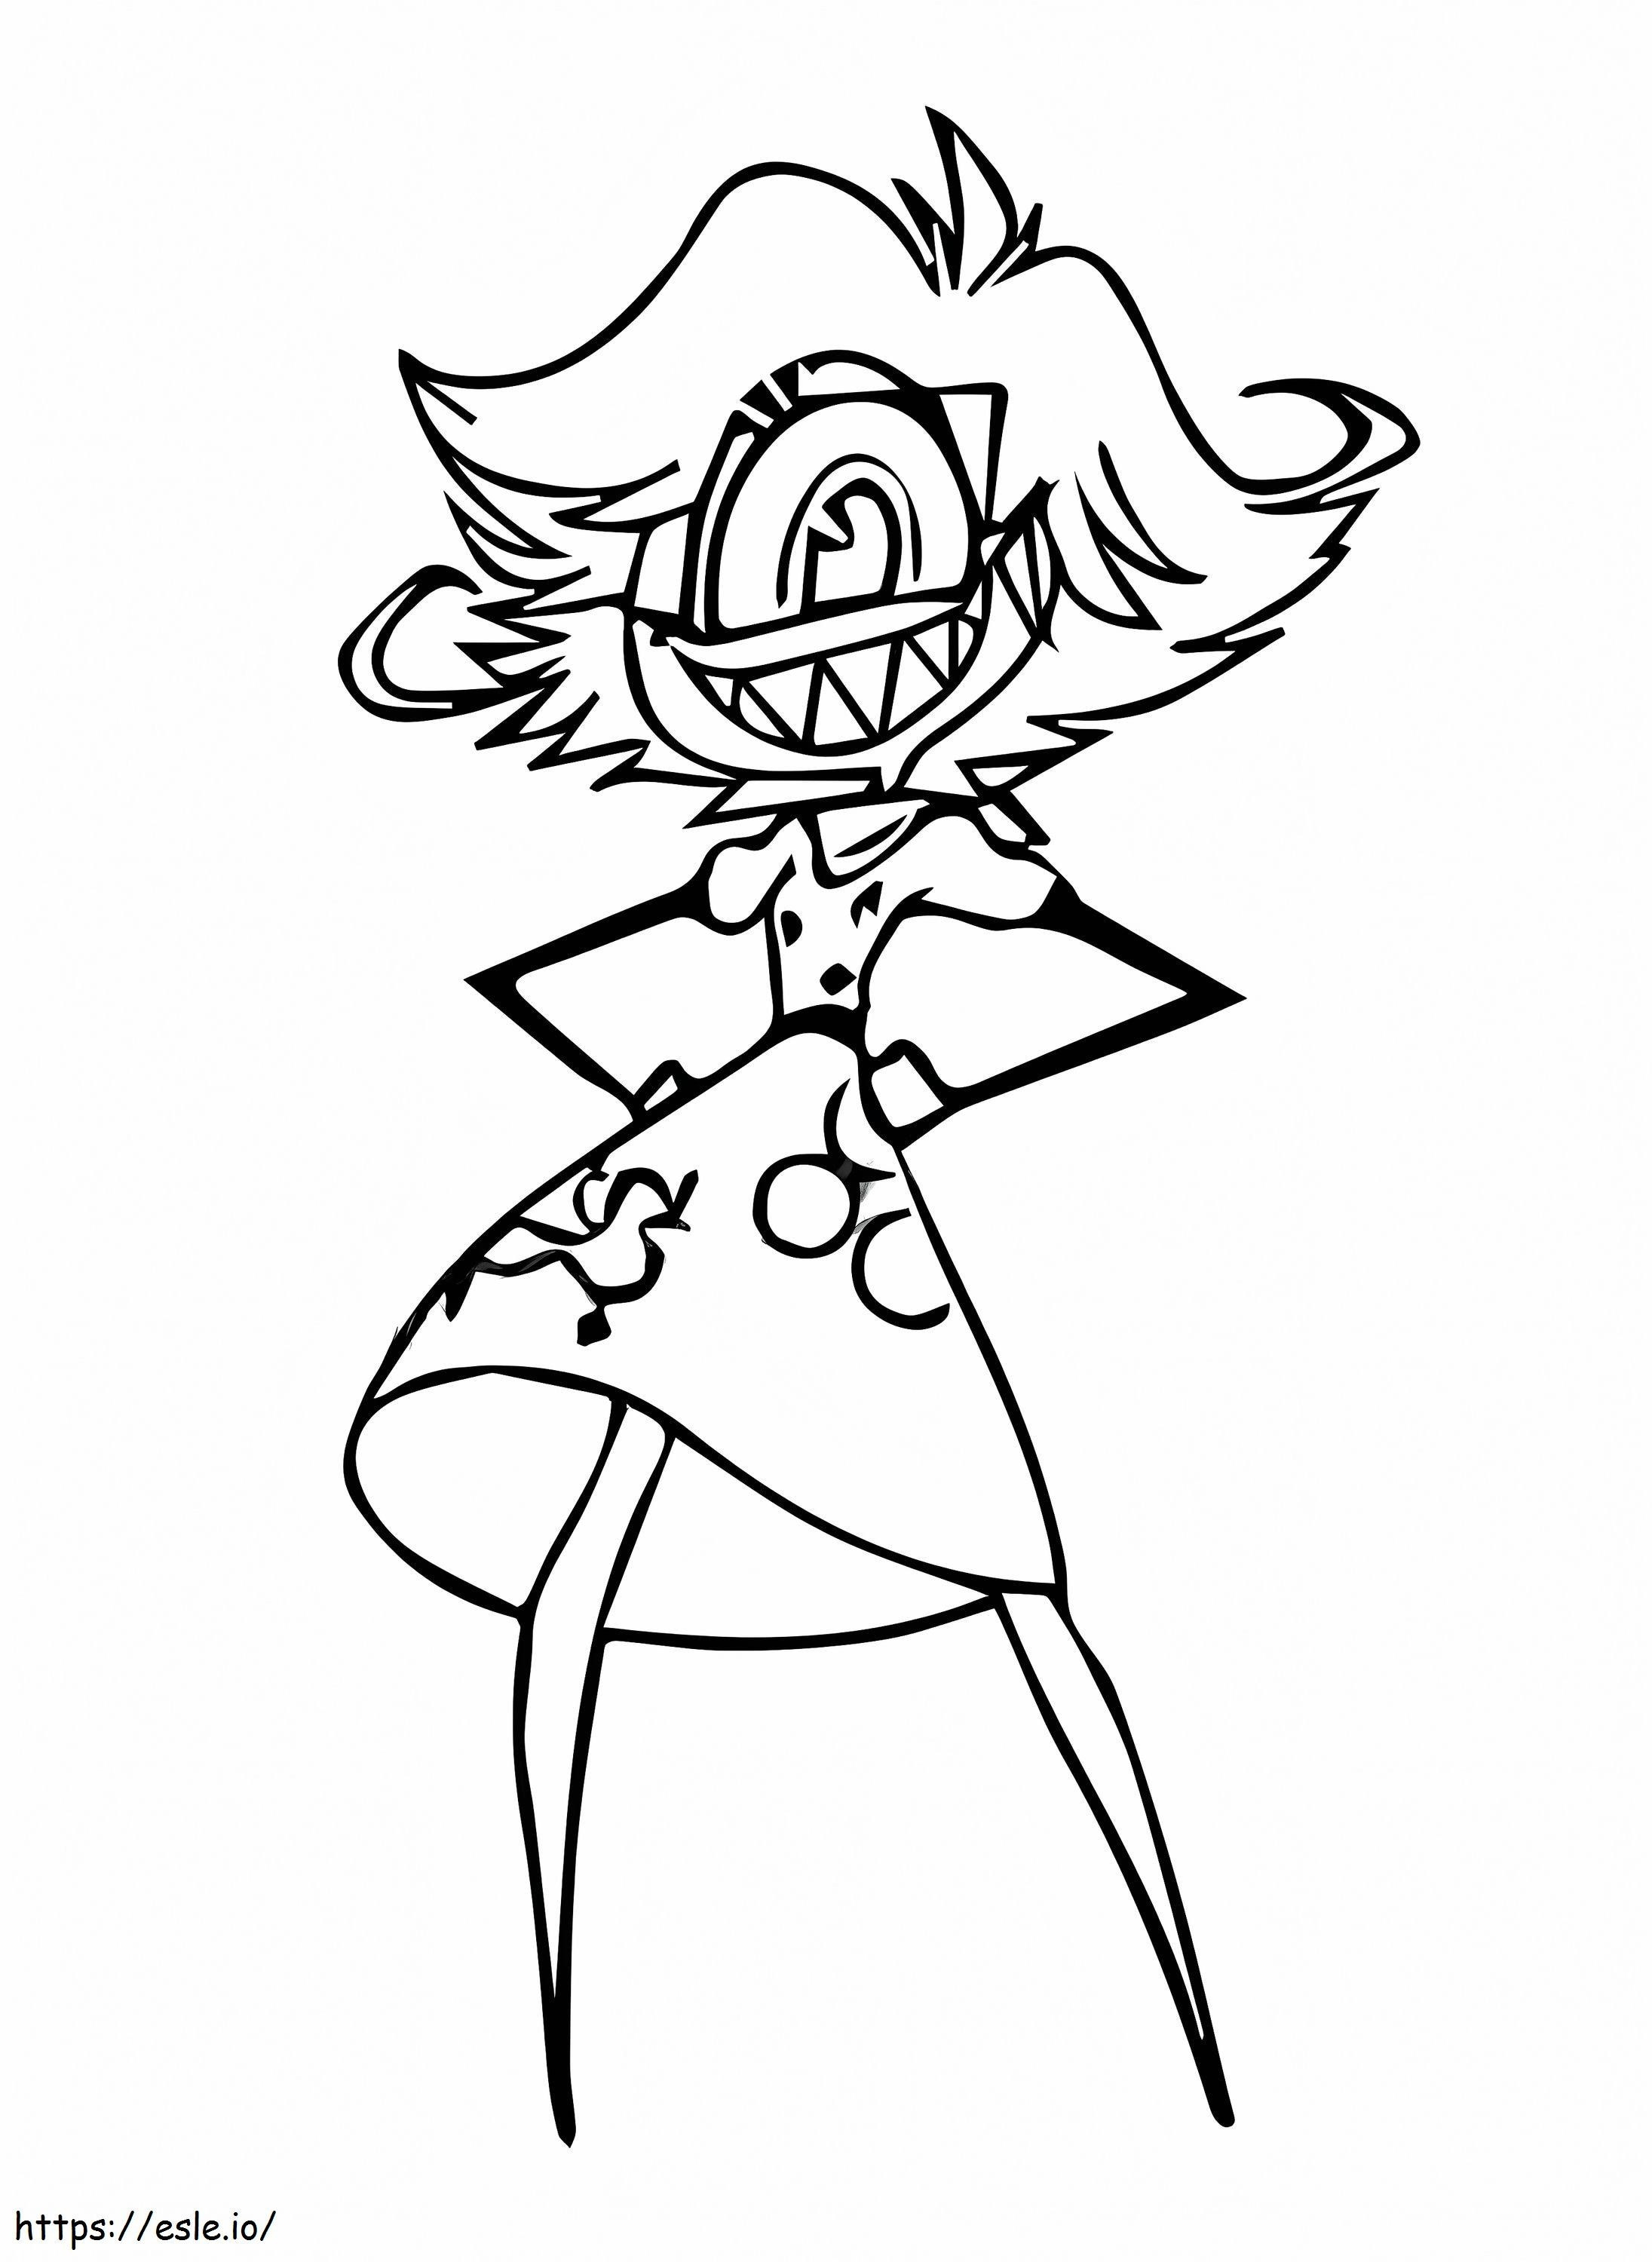 Niffty From Hazbin Hotel coloring page